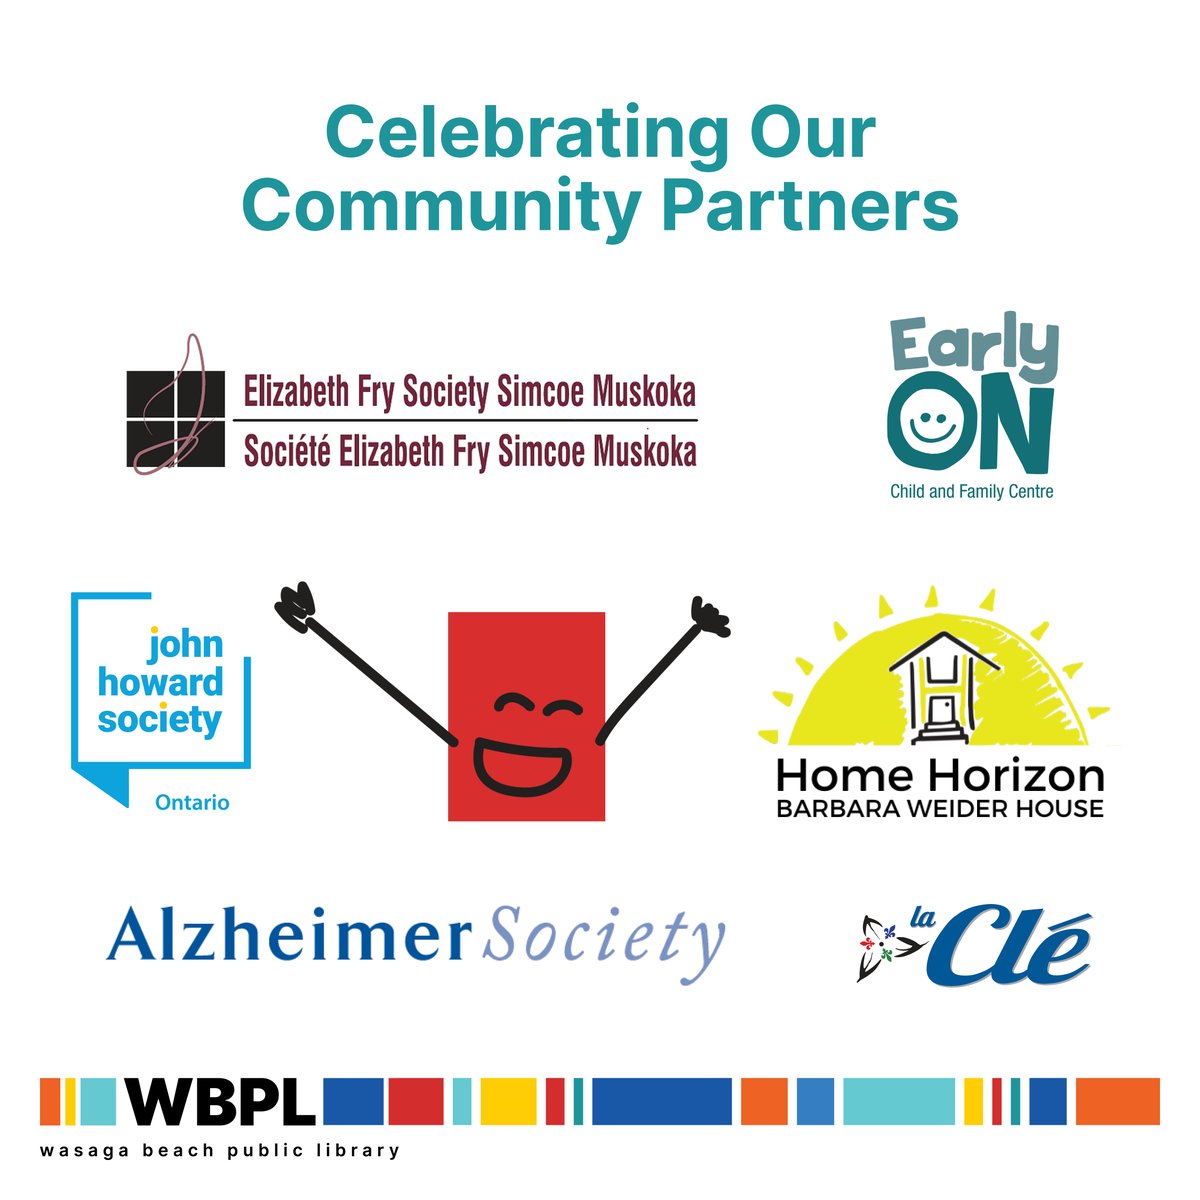 Reason #17 of 50 why libraries are invaluable: Social Service Partnerships! 🤝 Libraries team up with organizations like South Georgian Bay Community Health Centre, Alzheimer Society, & others to offer essential services at no cost. 💙 #50YearsOfSunshine #WasagaBeach #FindItHere